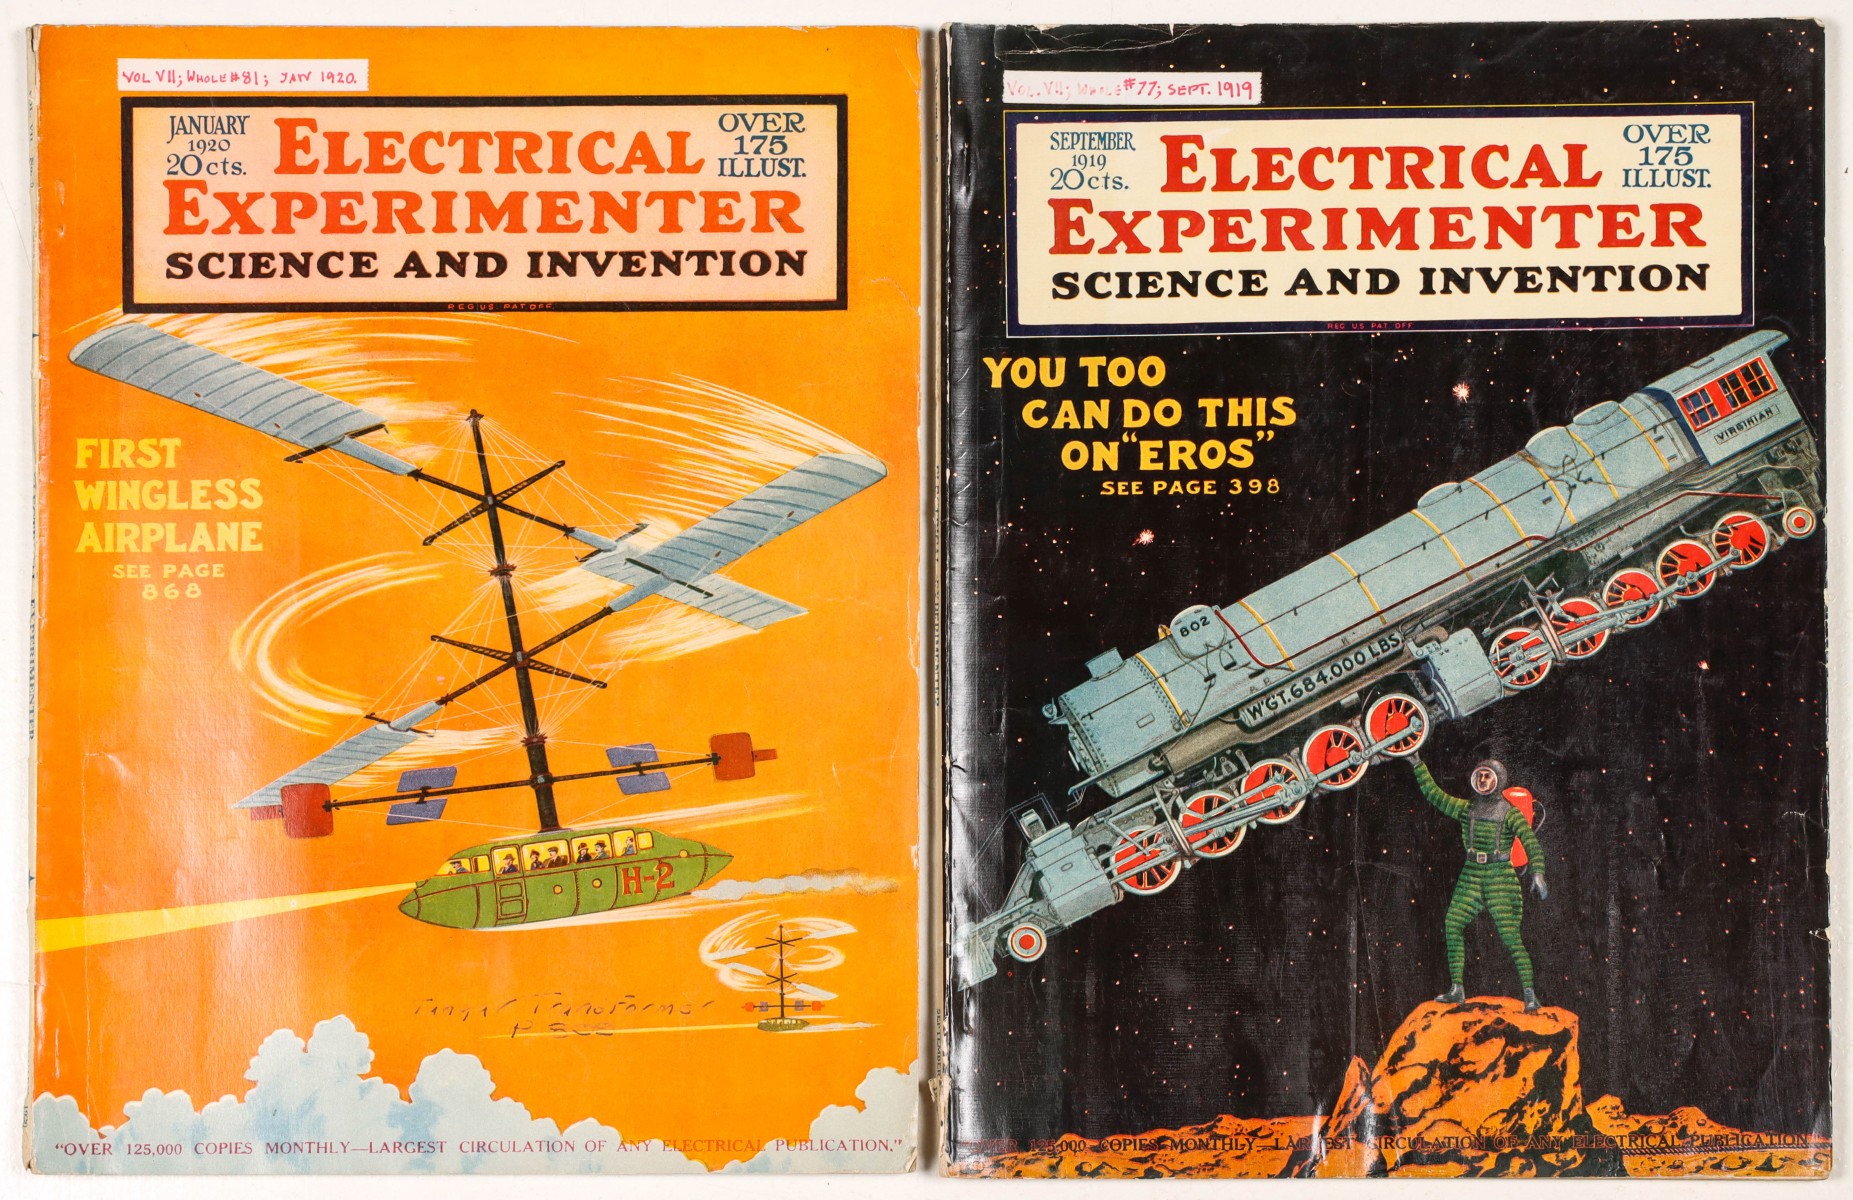 NINETEEN ISSUES OF ELECTRICAL EXPERIMENTER 1919 AND 1920